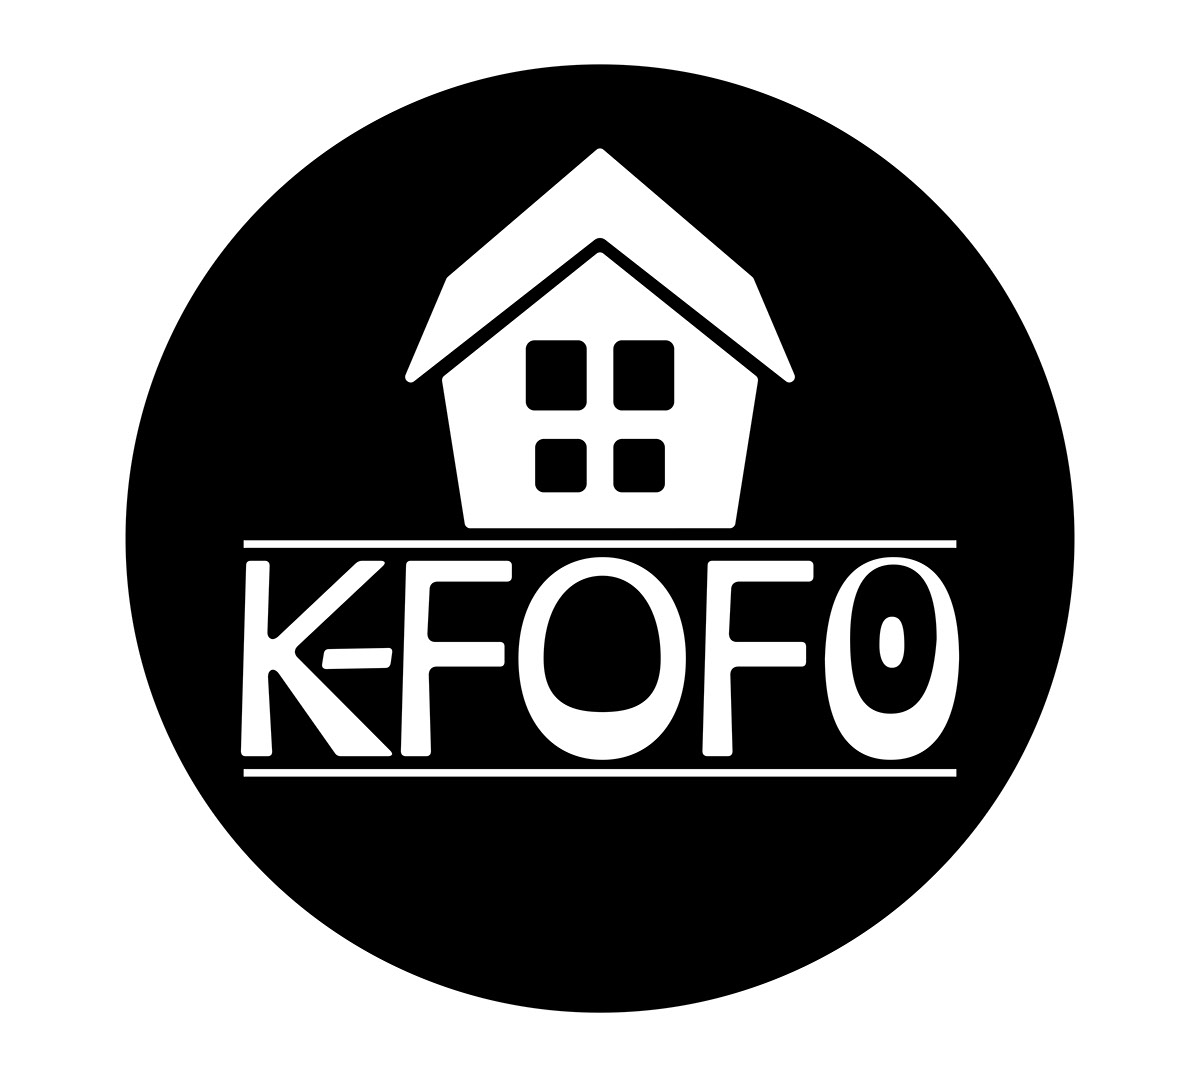 k-fofo assets rendition image